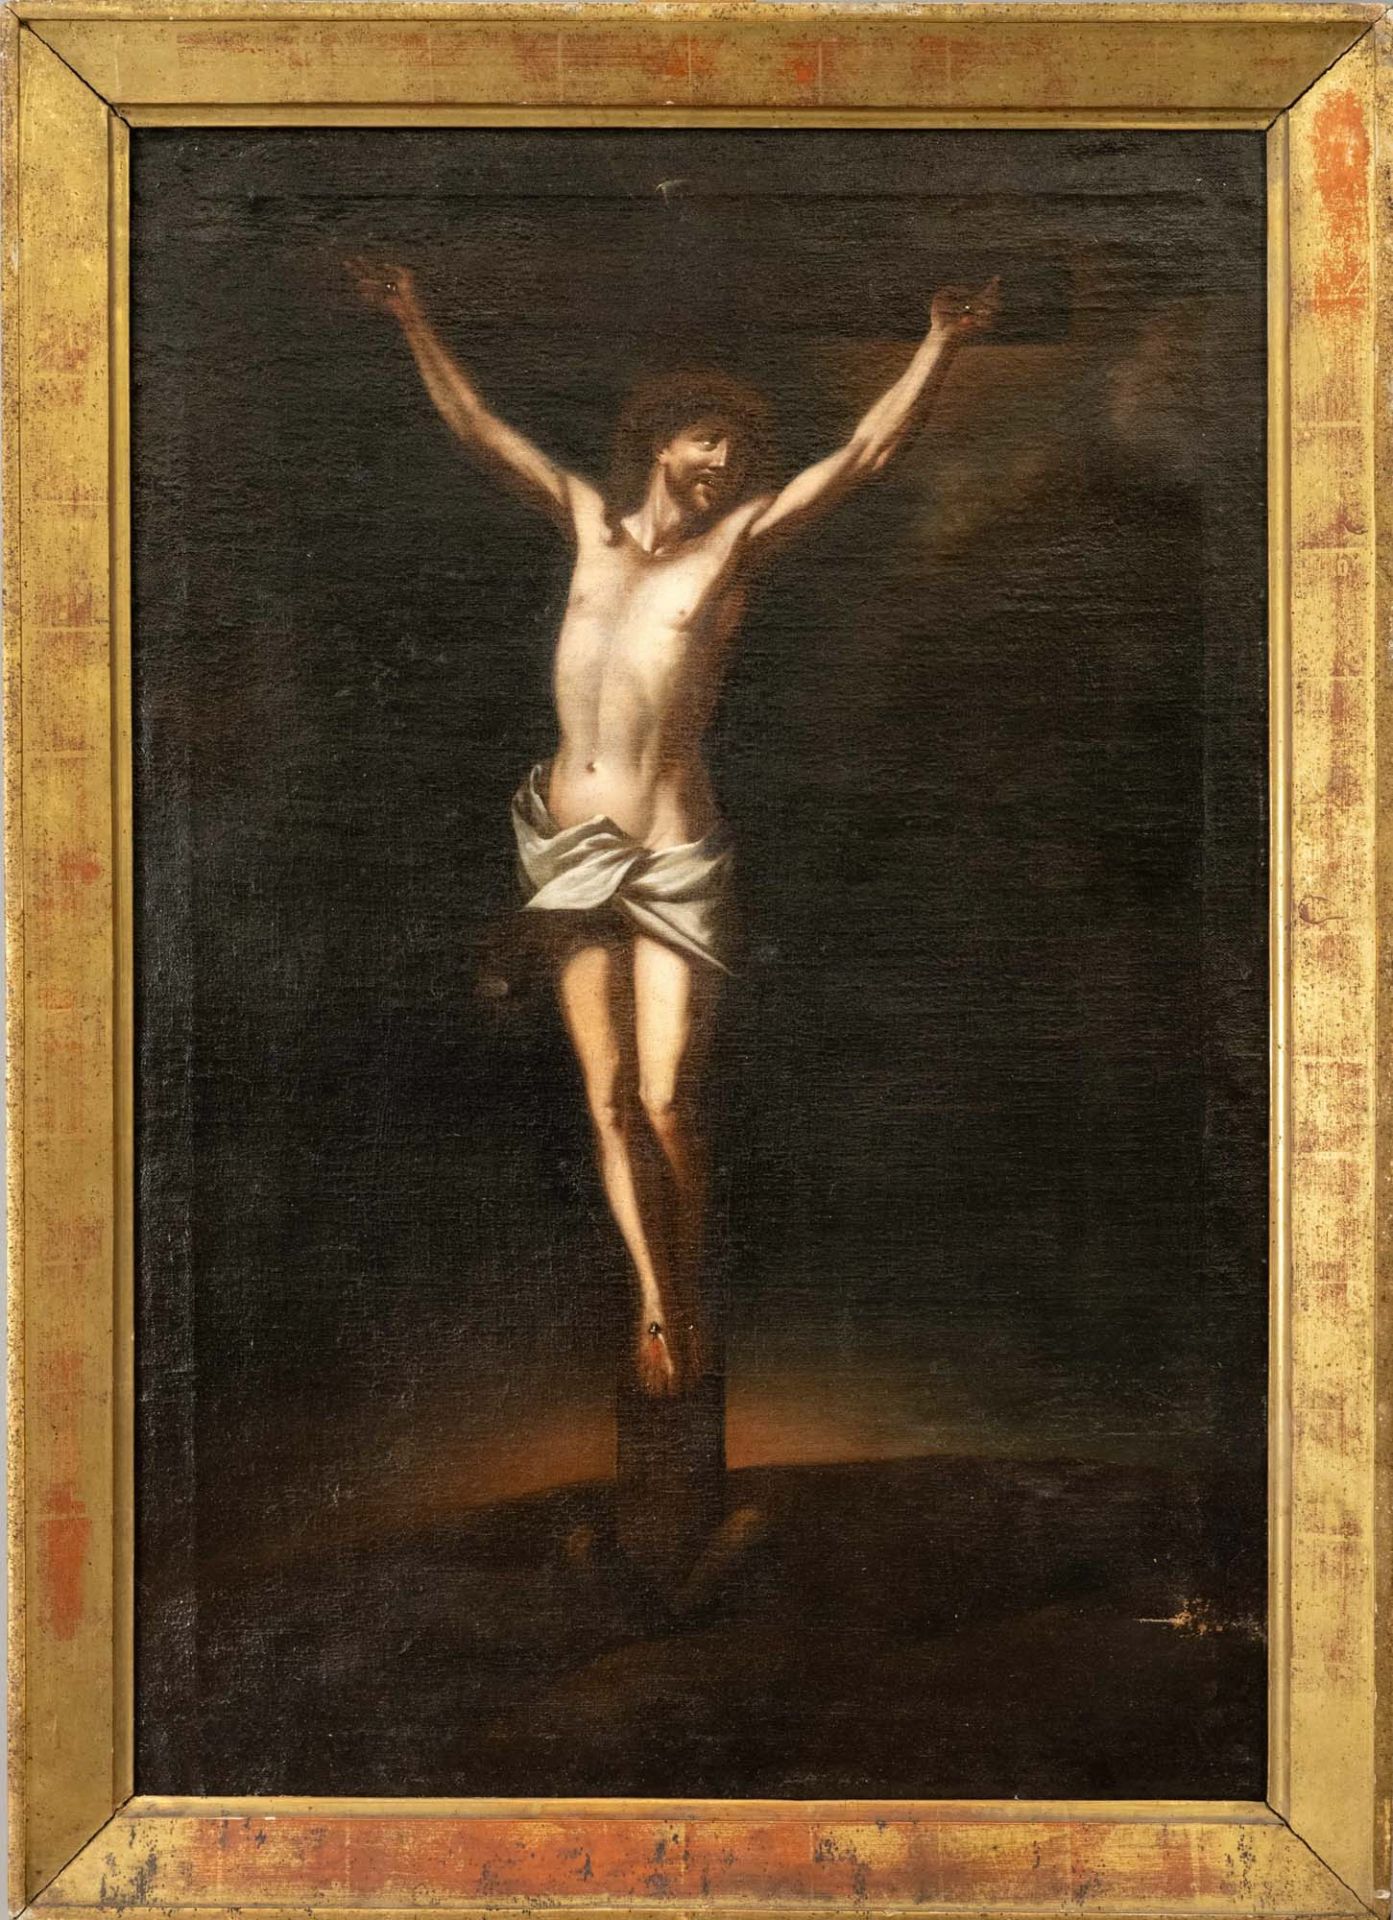 Anonymous 18th century sacral painter, Crucifixion of Christ, oil on canvas, unsigned, small tear